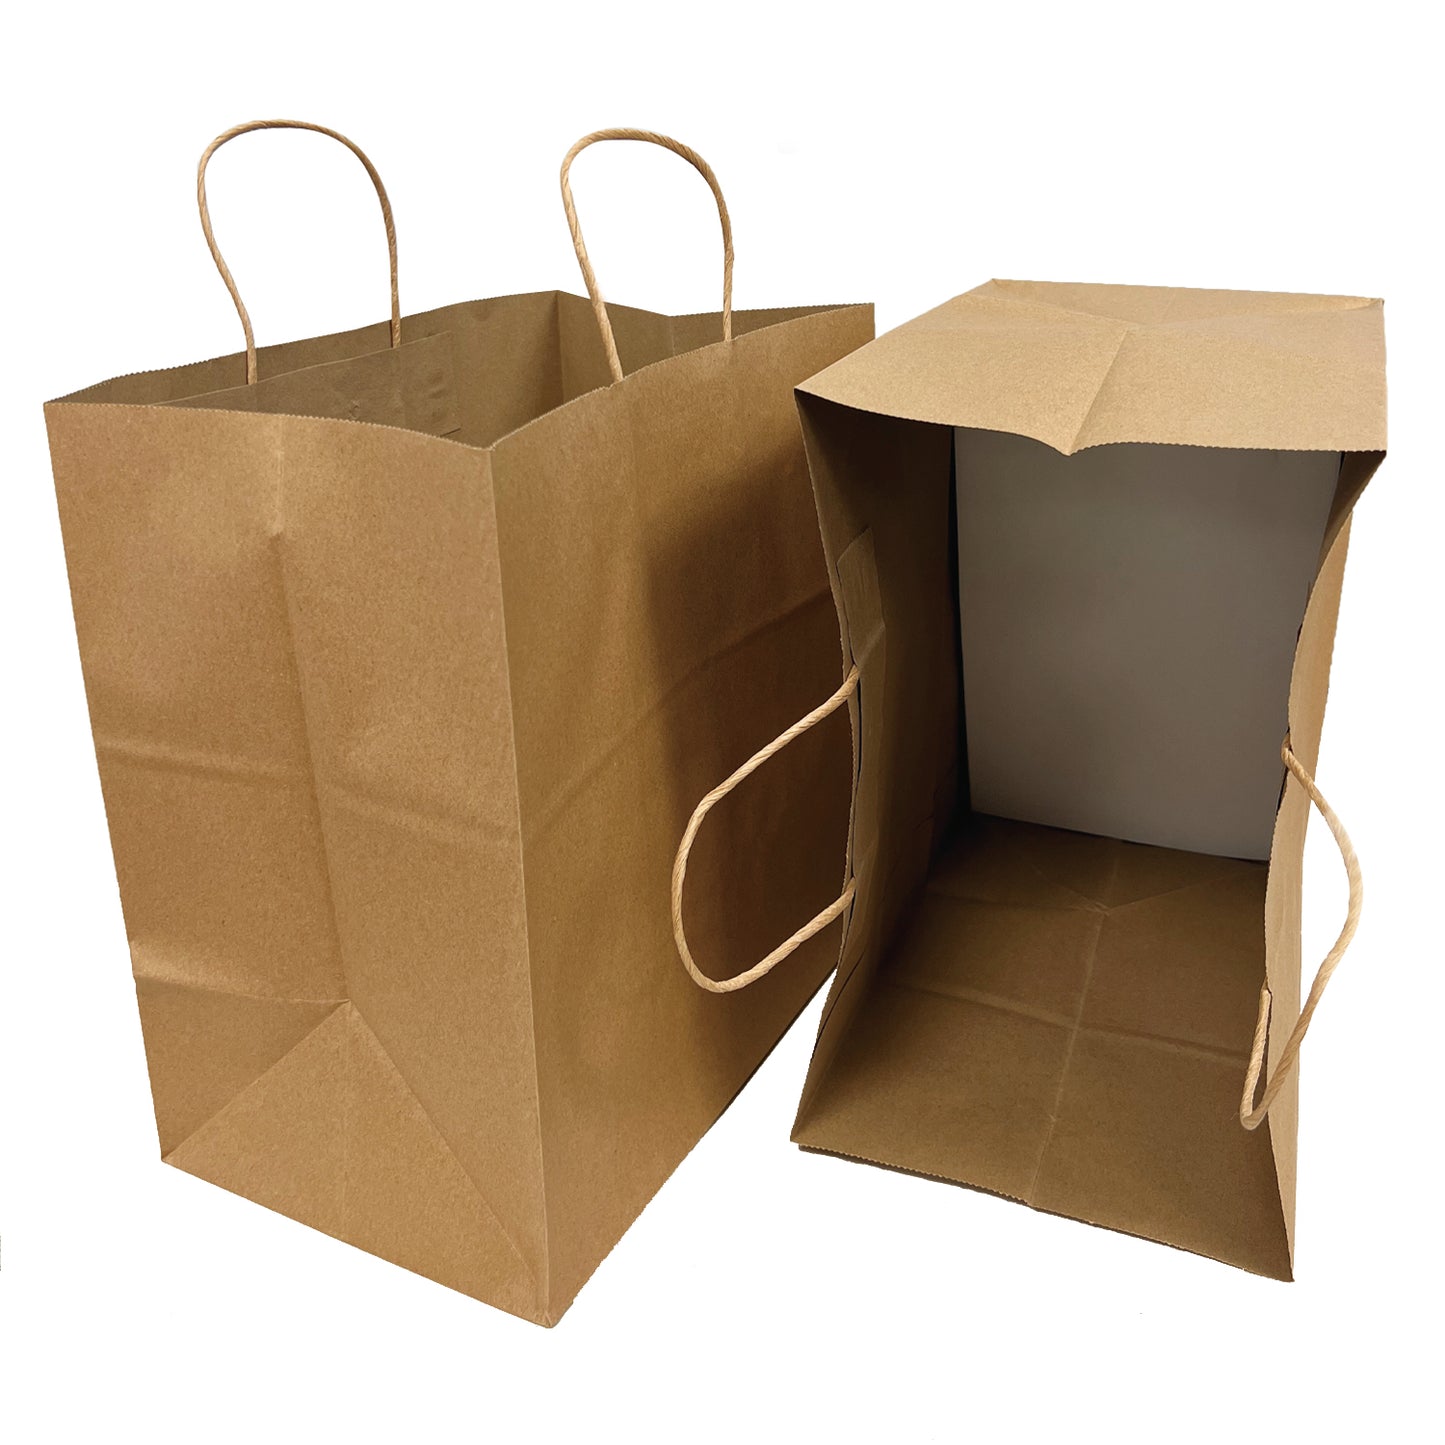 1383B | 200pcs Take Out 13x8x13 inches Kraft Paper Bag Cardboard Insert with Twisted Handles, $0.55/pc